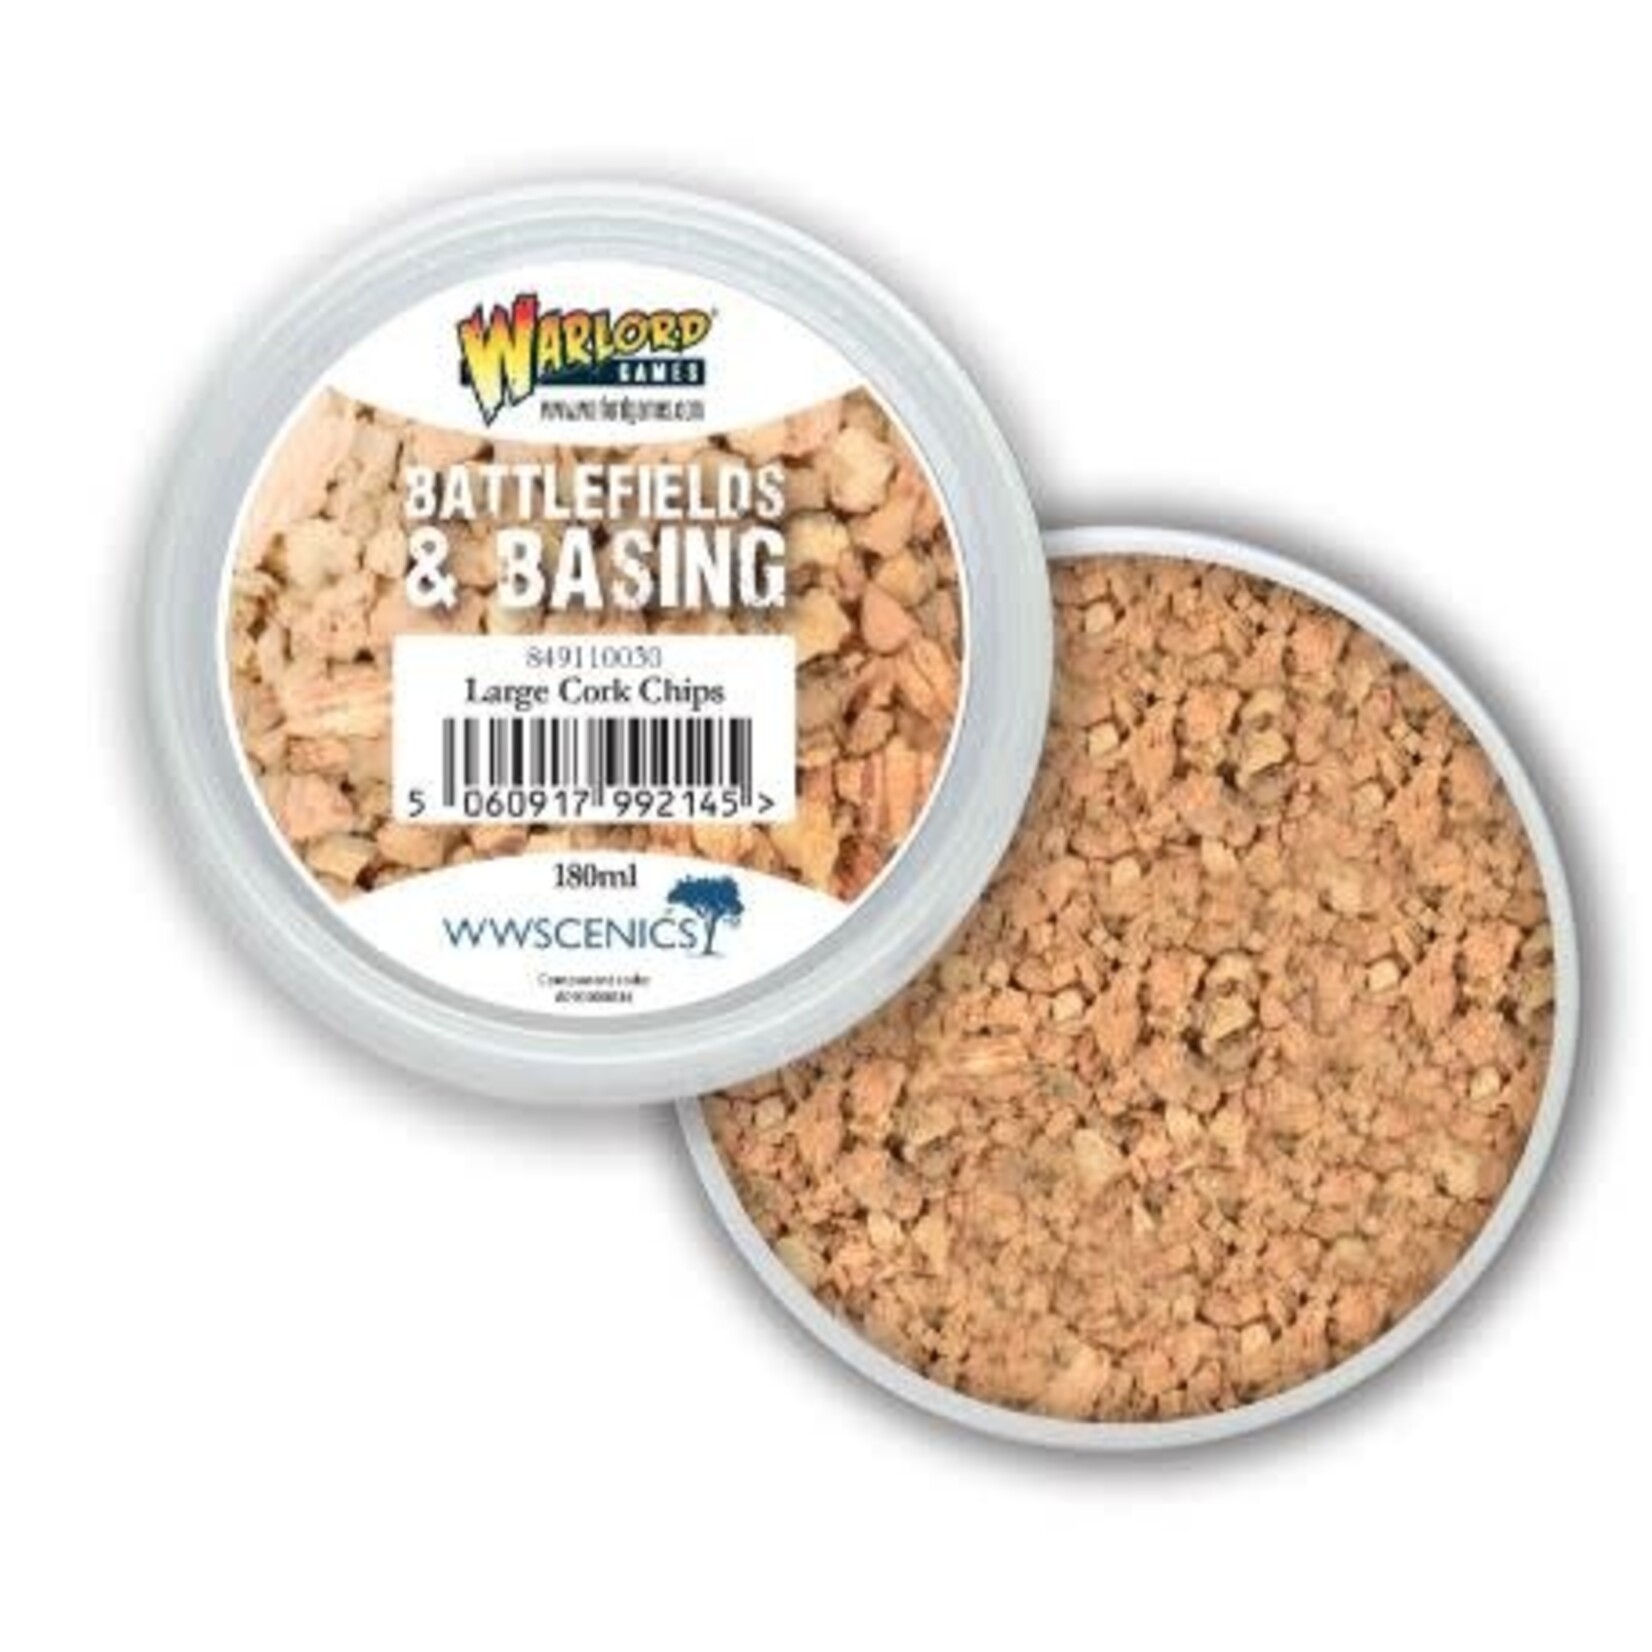 Warlord Games Warlord Games: Battlefields & Basing: Large Cork Chips (180ml)